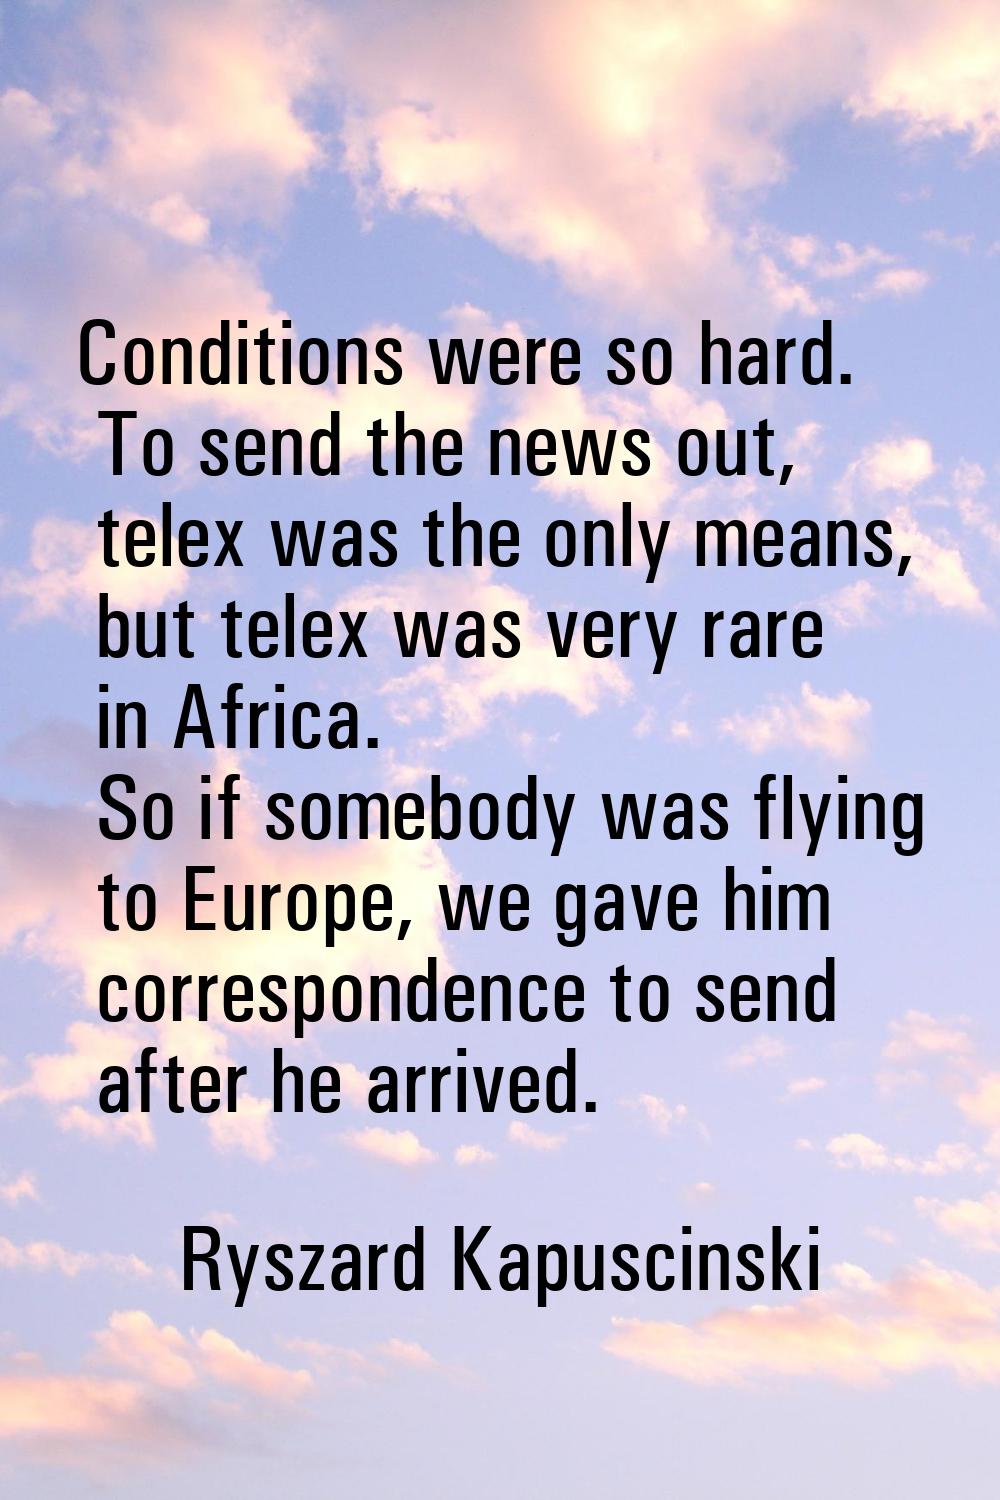 Conditions were so hard. To send the news out, telex was the only means, but telex was very rare in